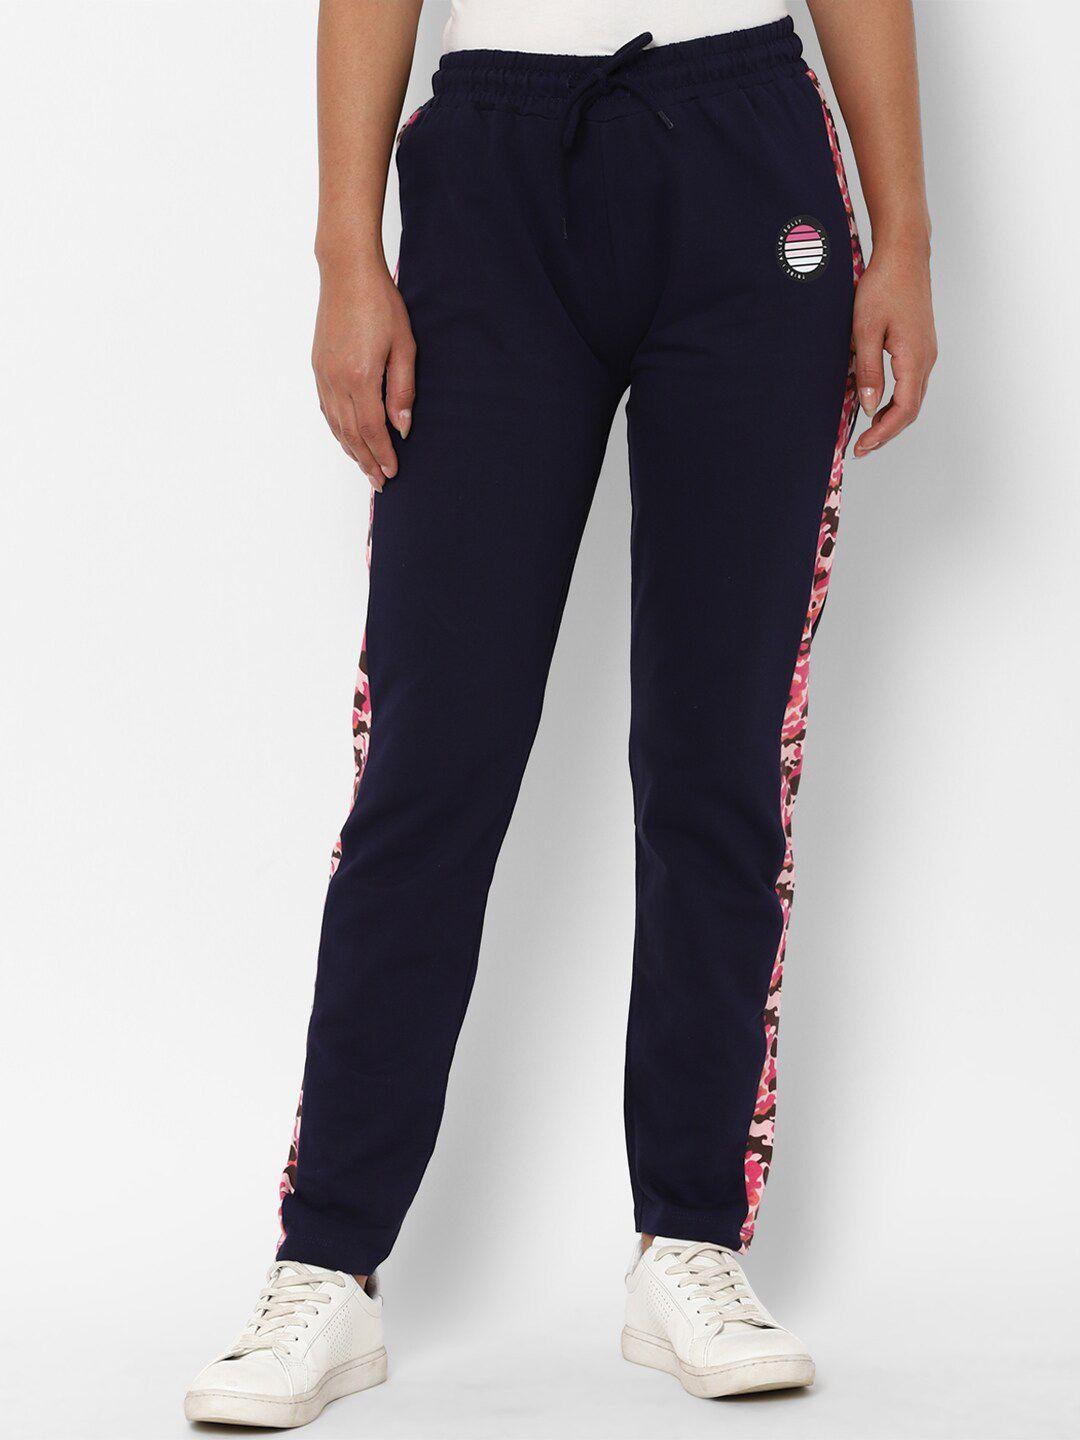 Allen Solly Woman Navy Blue Printed Track Pants